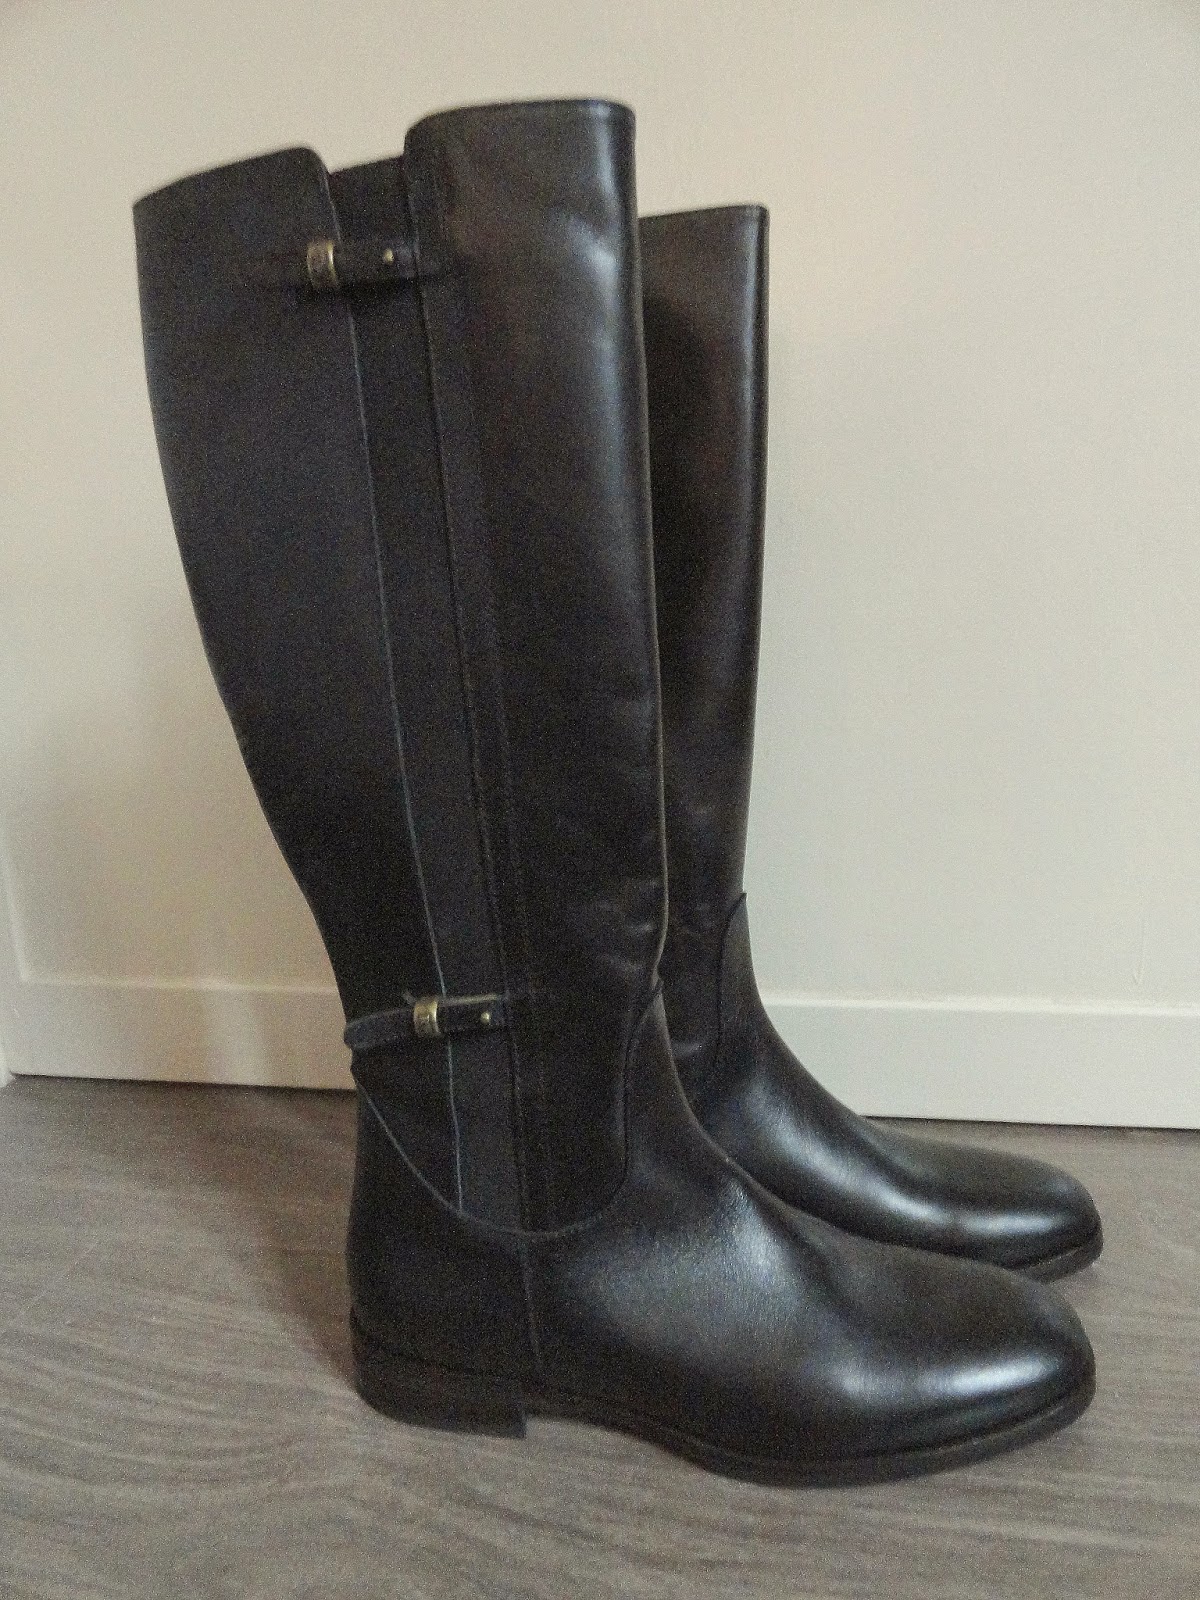 Clothes & Dreams: These boots are made for walking (shoplog): Black knee-high River Woods boots